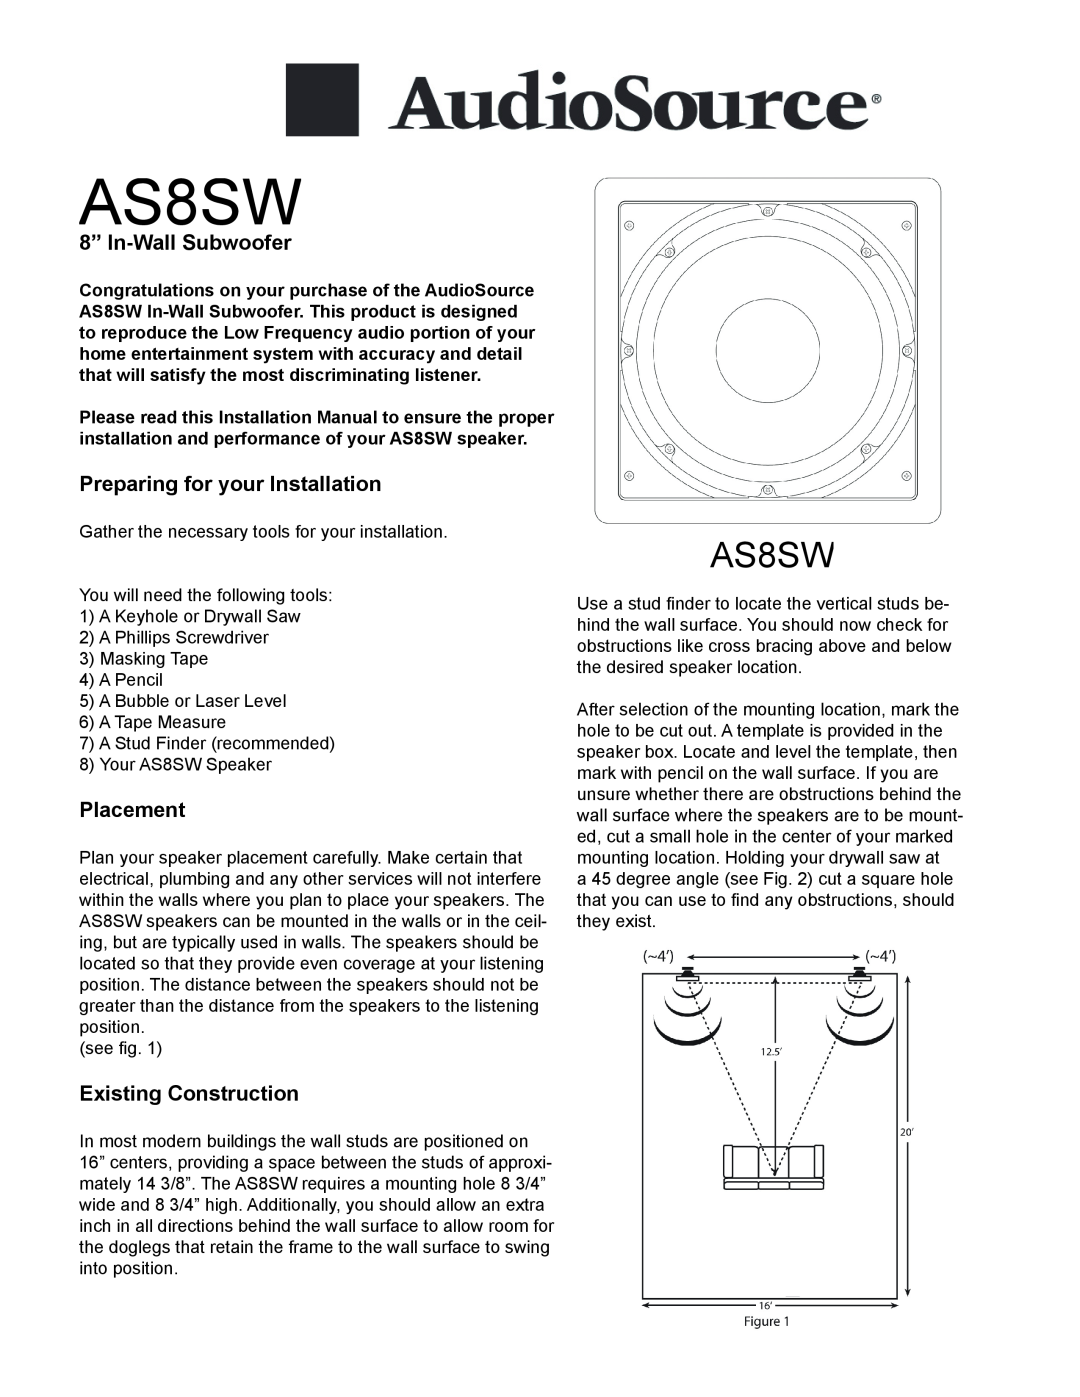 AudioSource 8 In-Wall Subwoofer installation manual AS8SW, 8” In-WallSubwoofer, Preparing for your Installation, Placement 